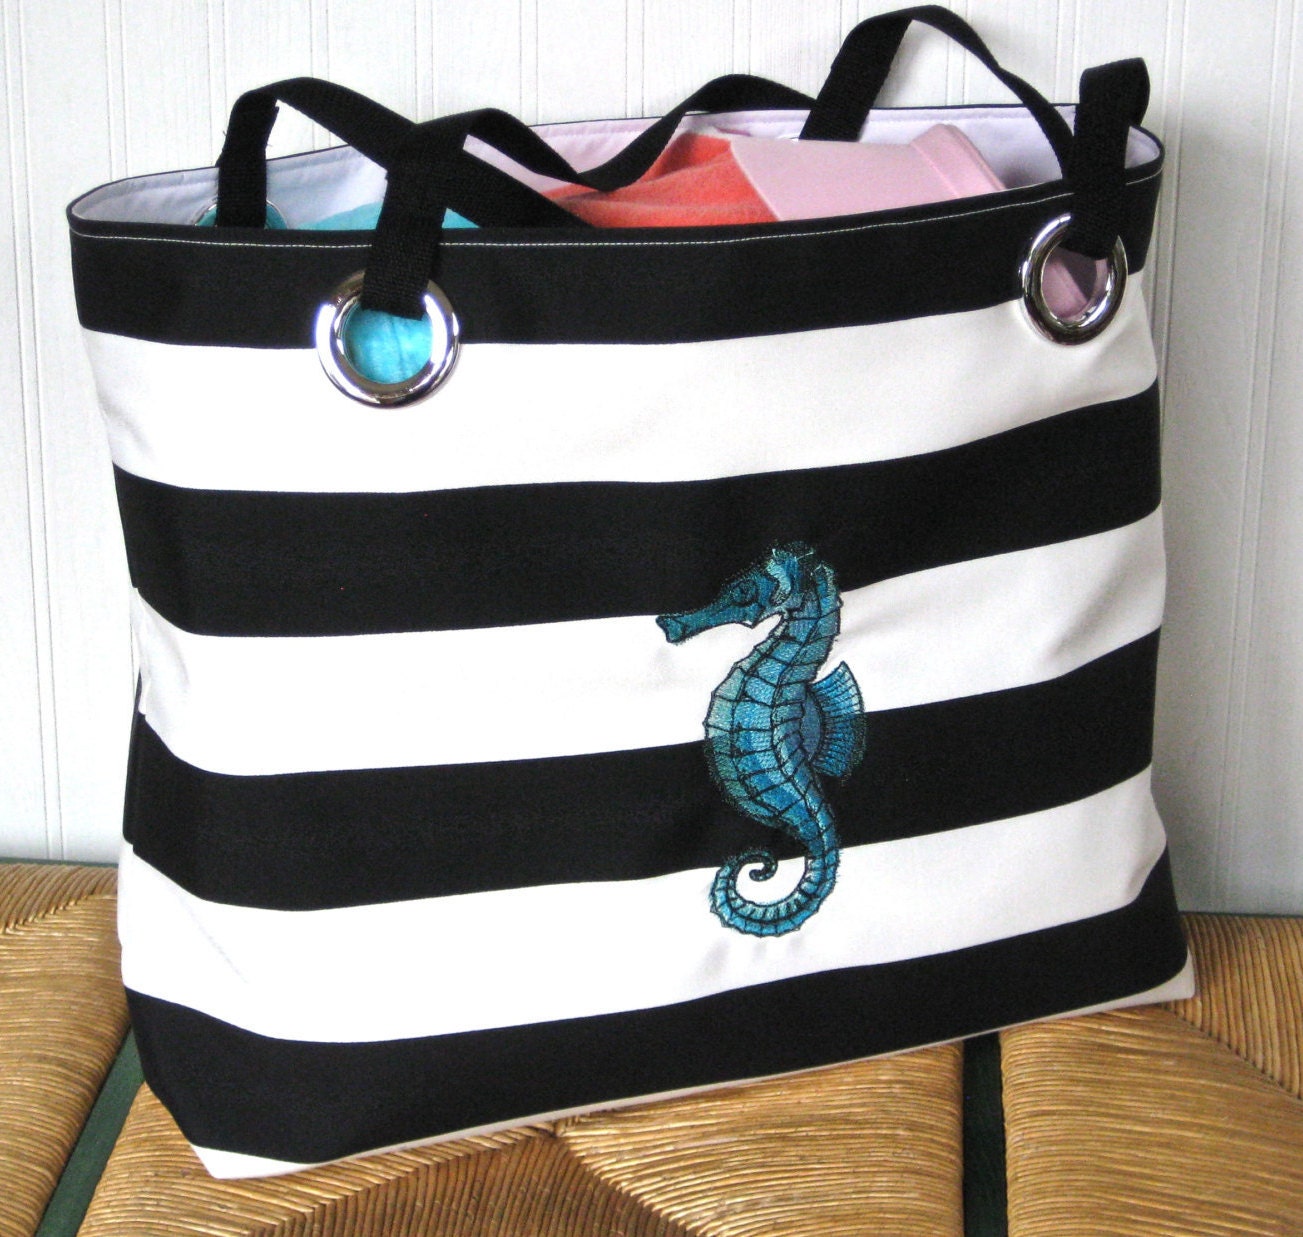 Beach Bag Extra Large Seahorse Tote Black and White Tote Pool